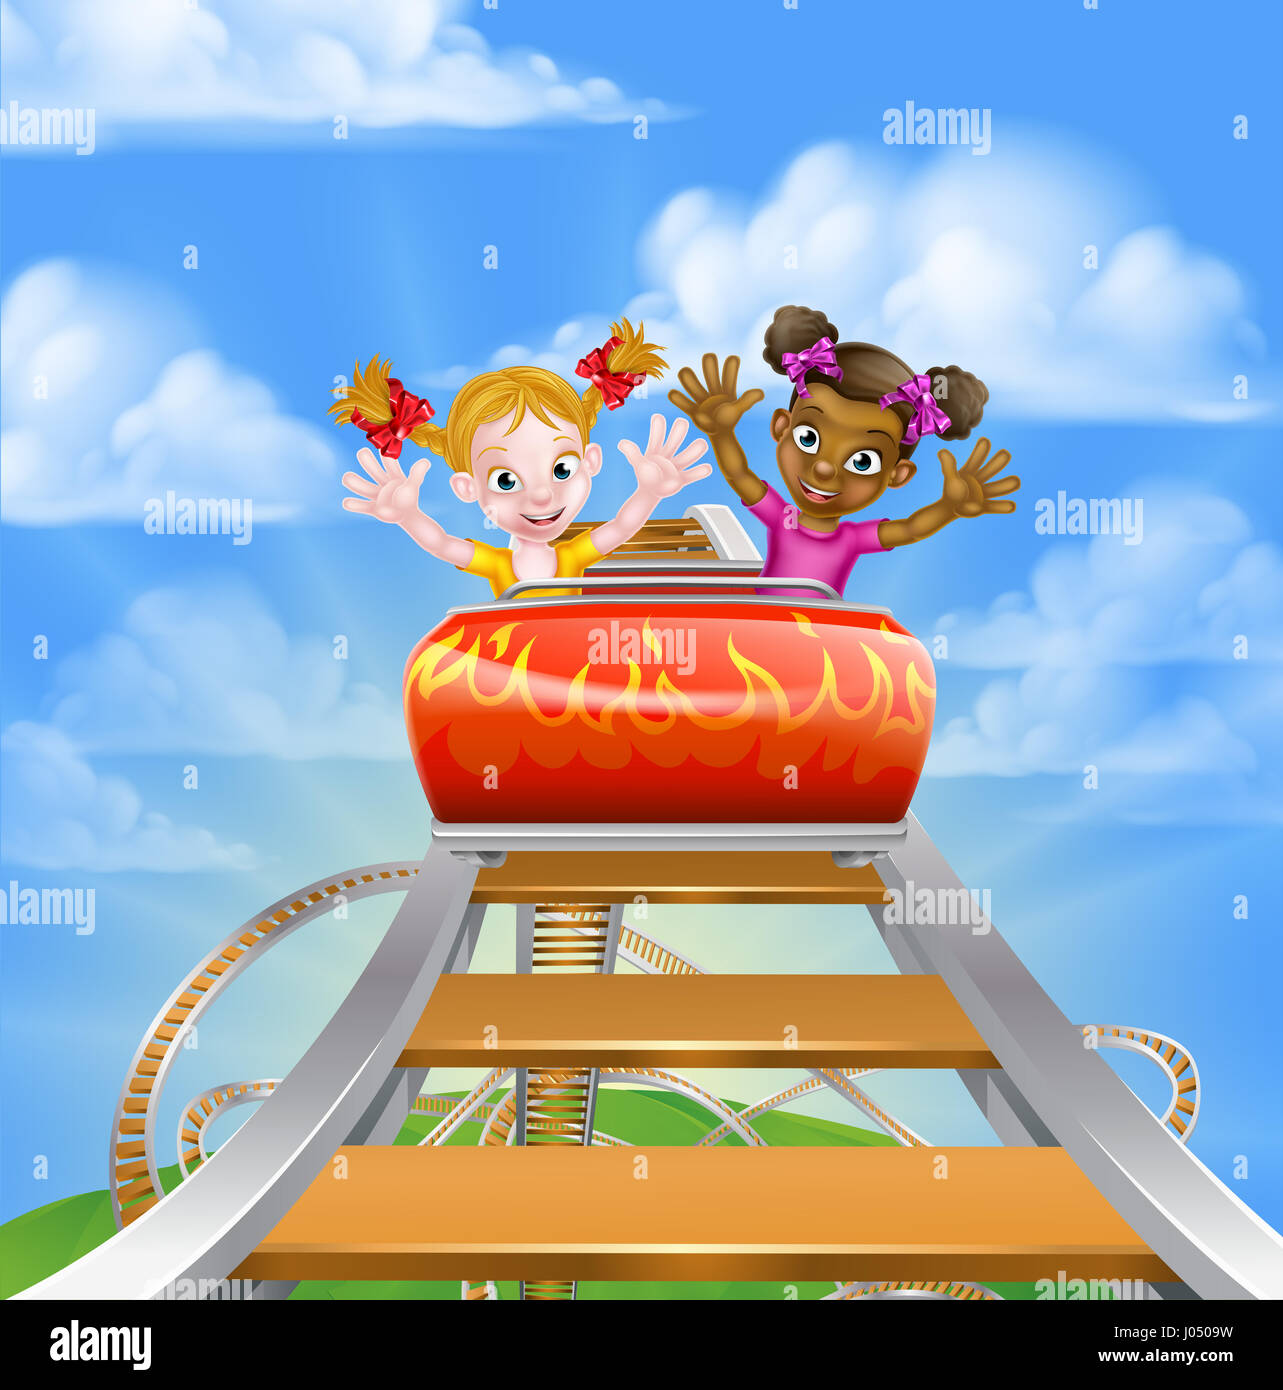 Cartoon girls, one black one white, riding on a roller coaster ride at a theme park or amusement park Stock Photo